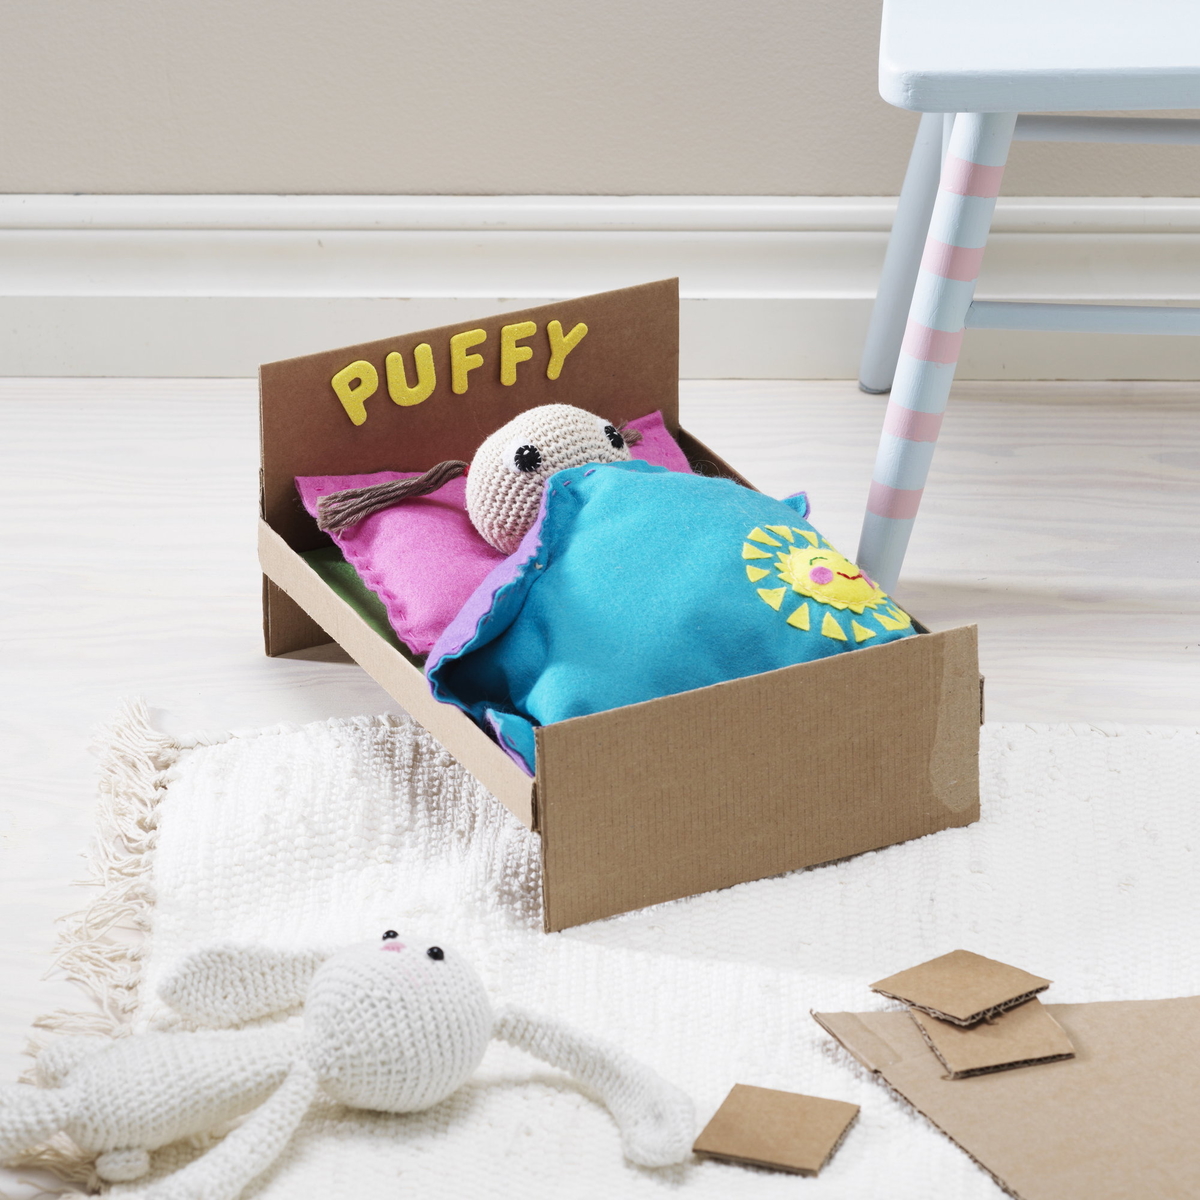 Turn a box into a doll bed